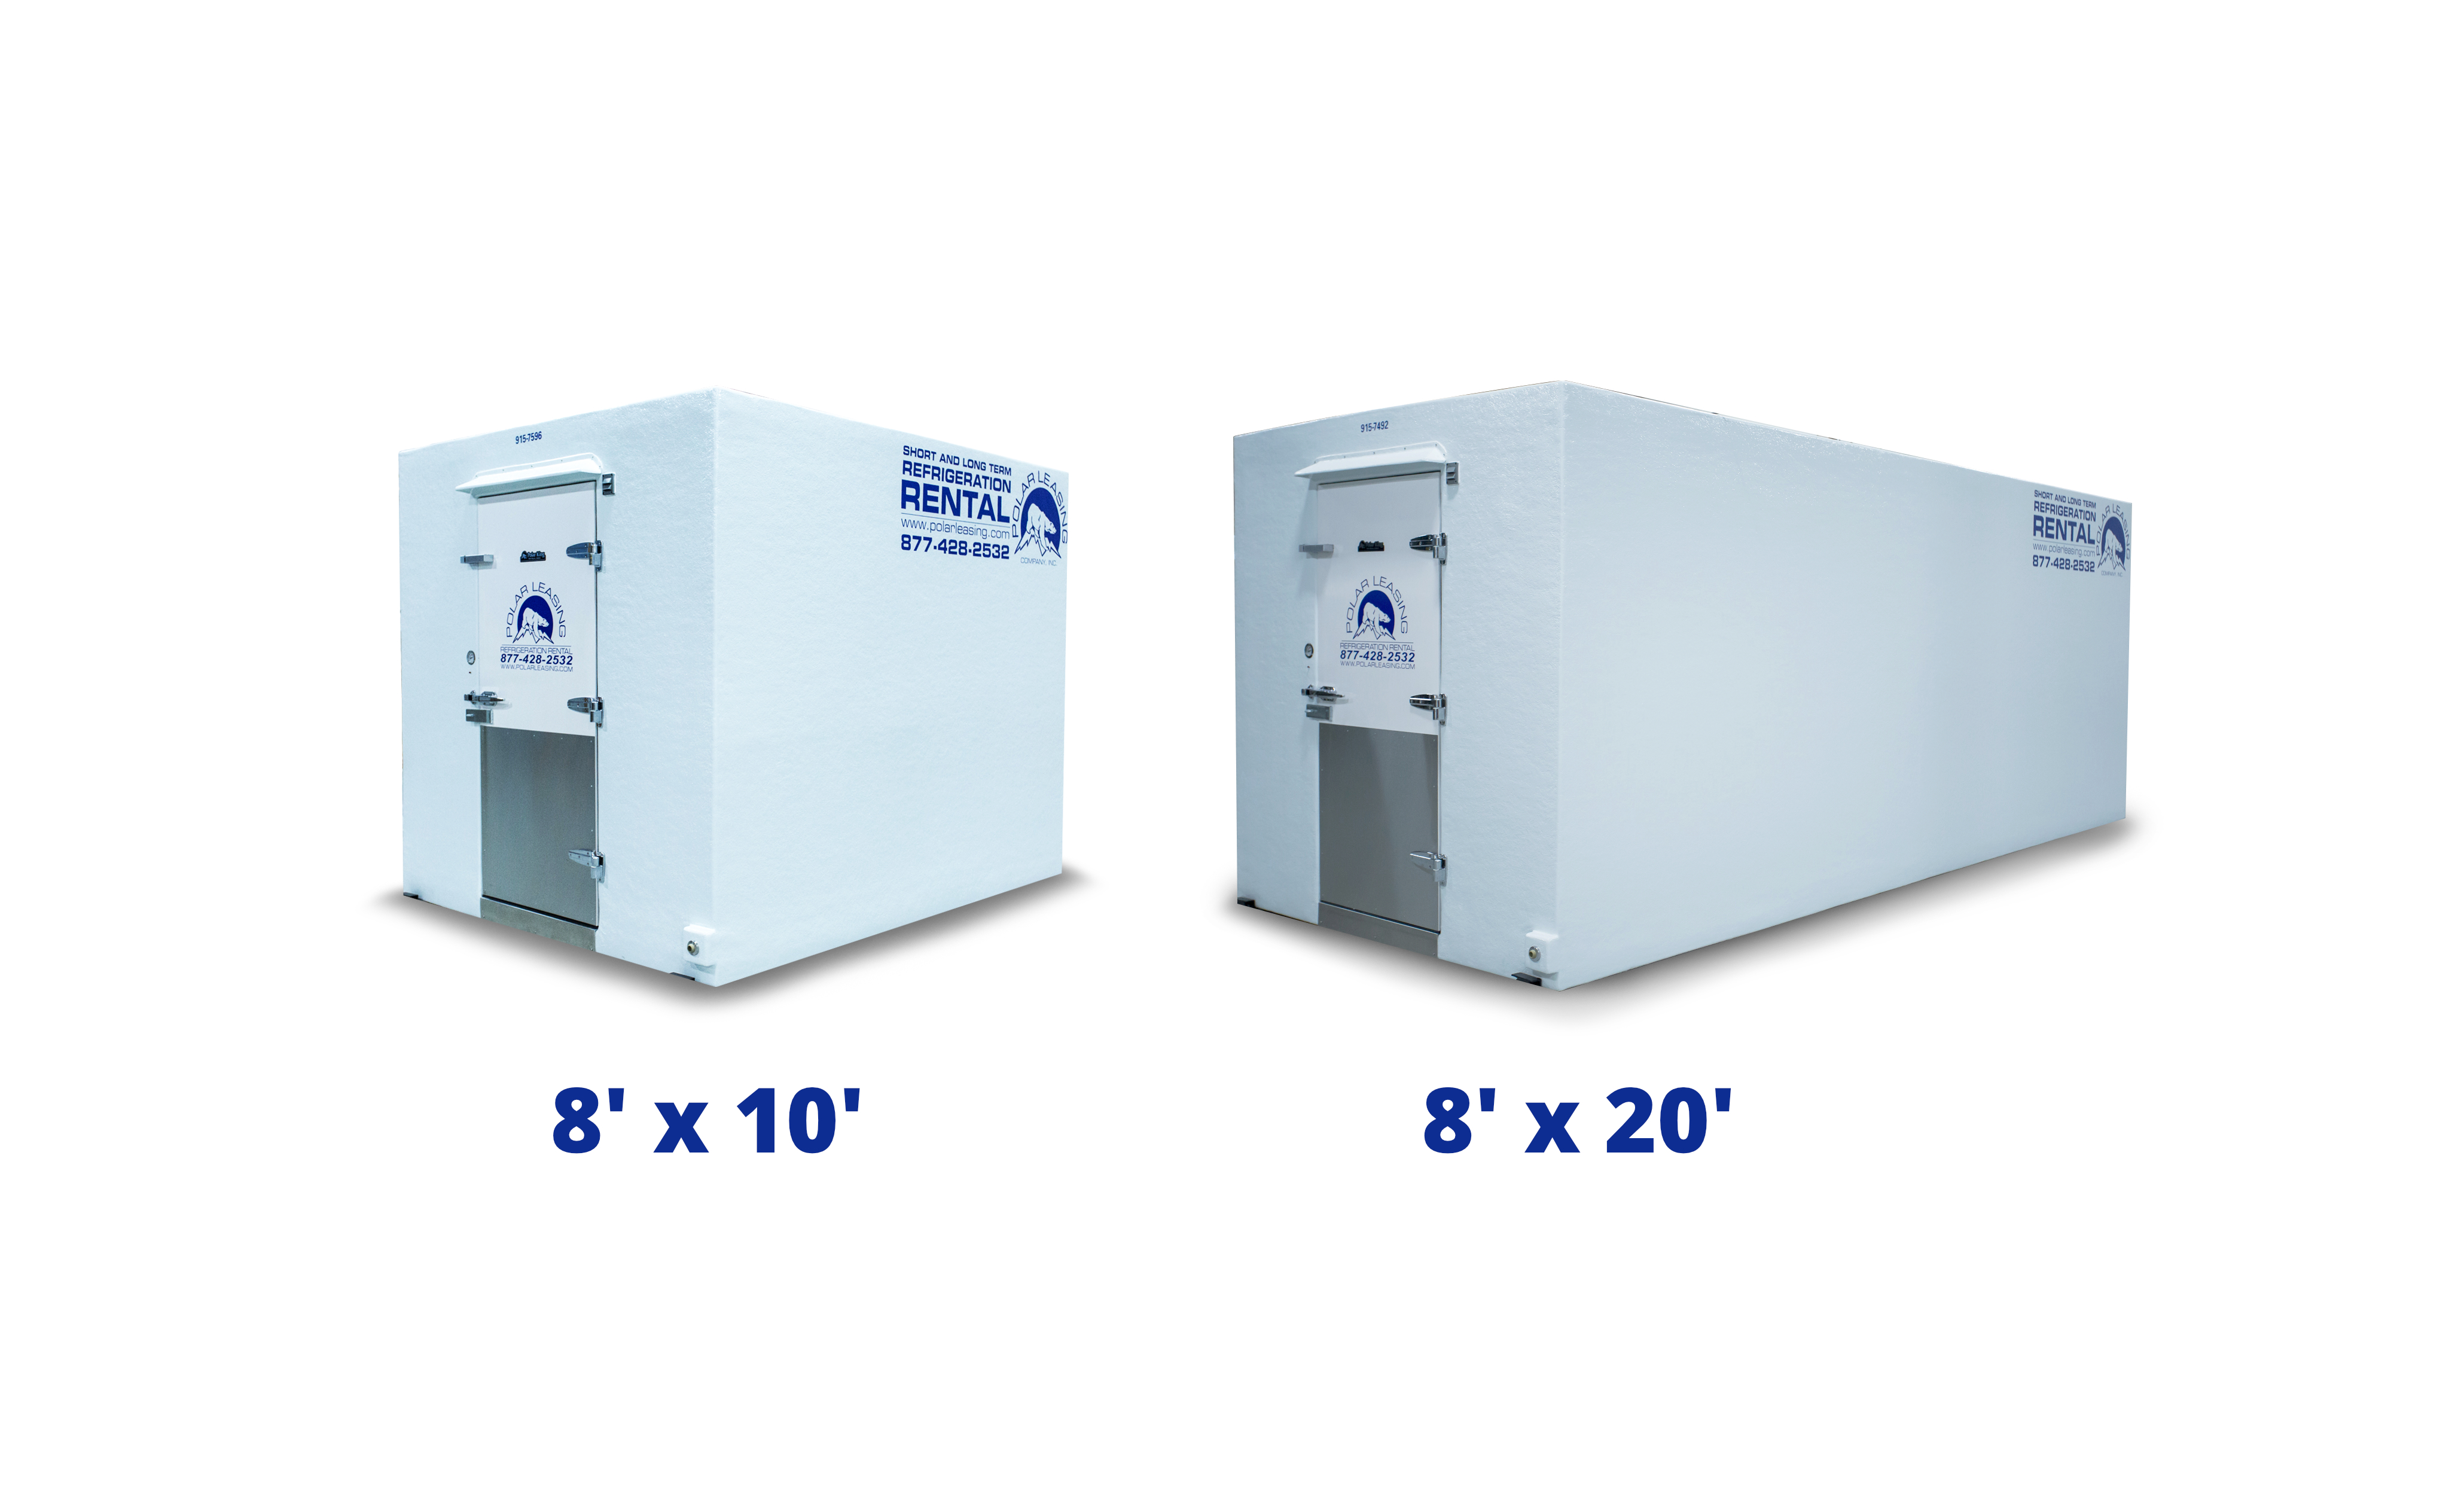 Polar Leasing has been providing walk-in refrigerator and freezer units since 2002. 